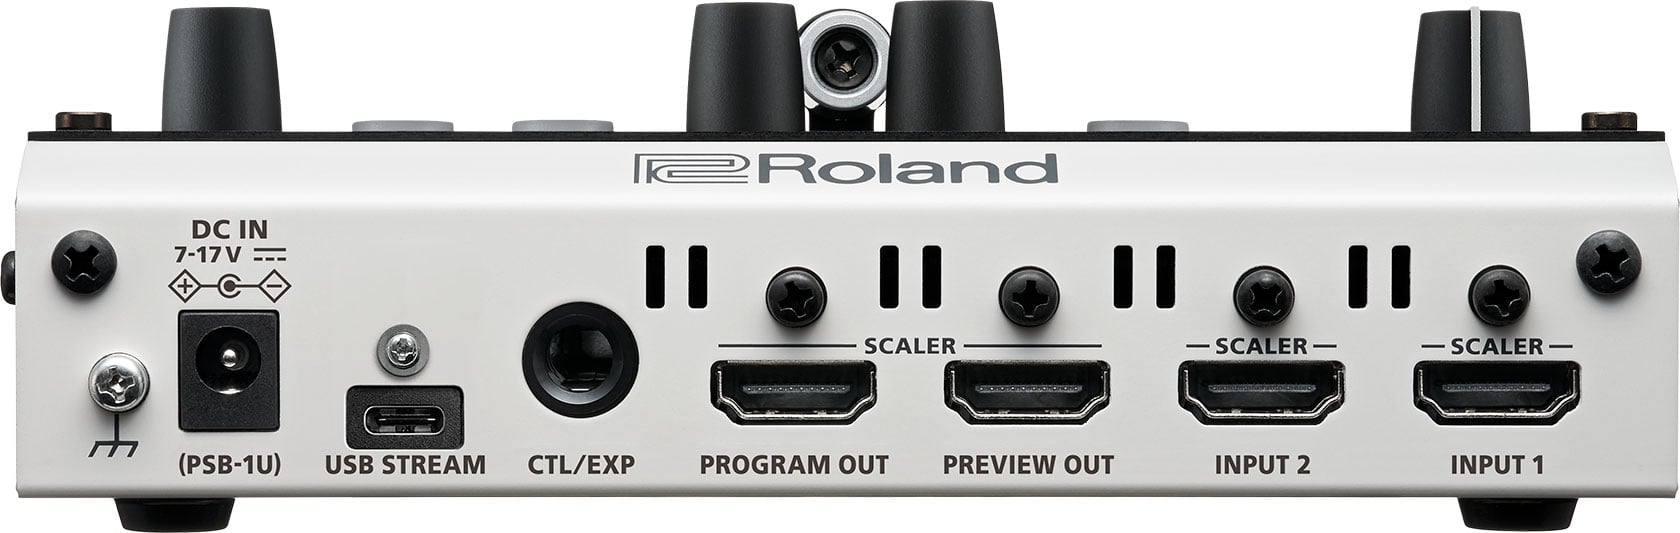 Roland Professional A/V V-02HD-MKII Multi-Format Live Streaming 